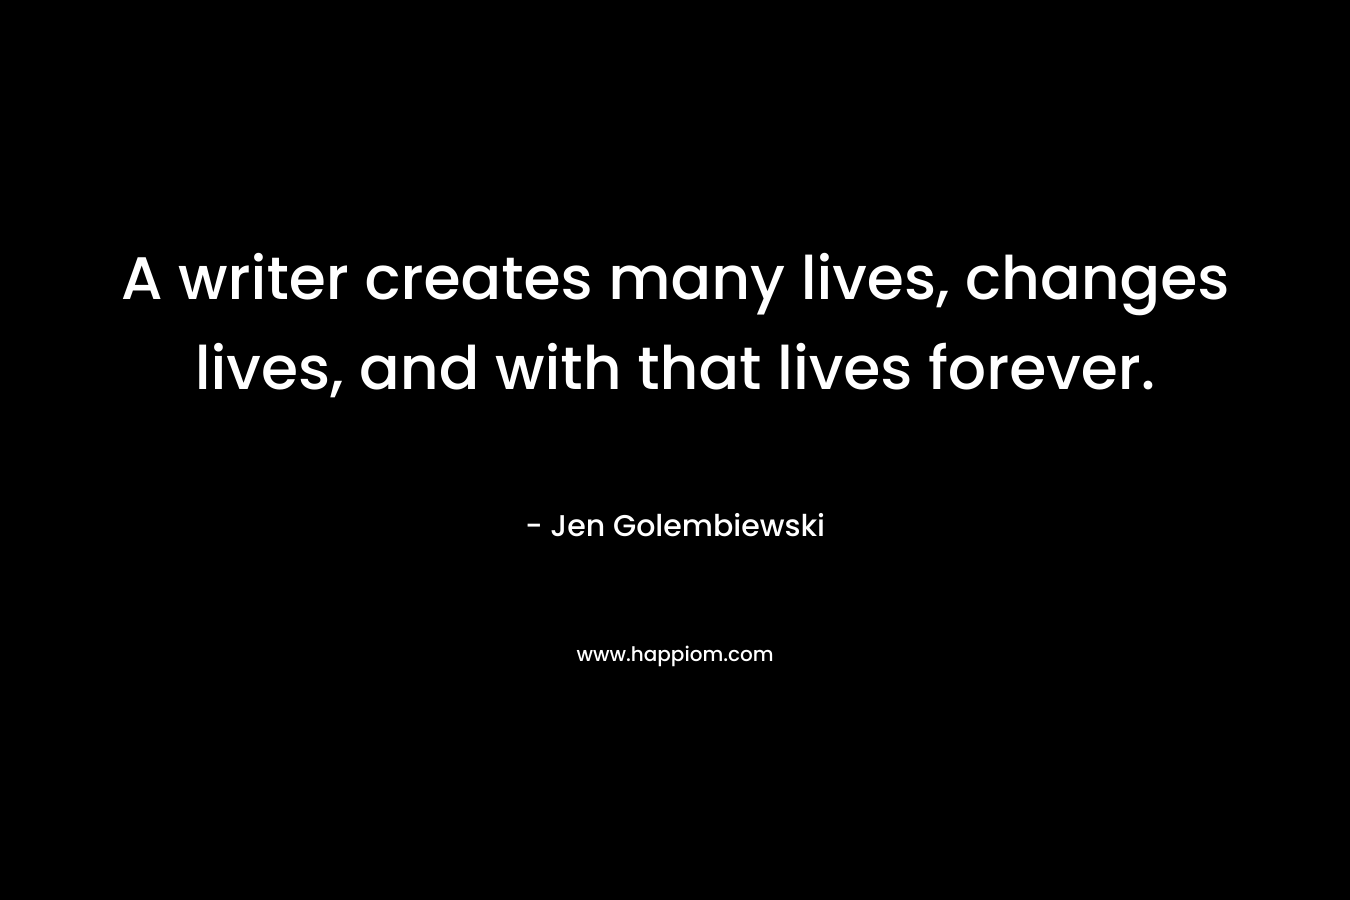 A writer creates many lives, changes lives, and with that lives forever. – Jen Golembiewski